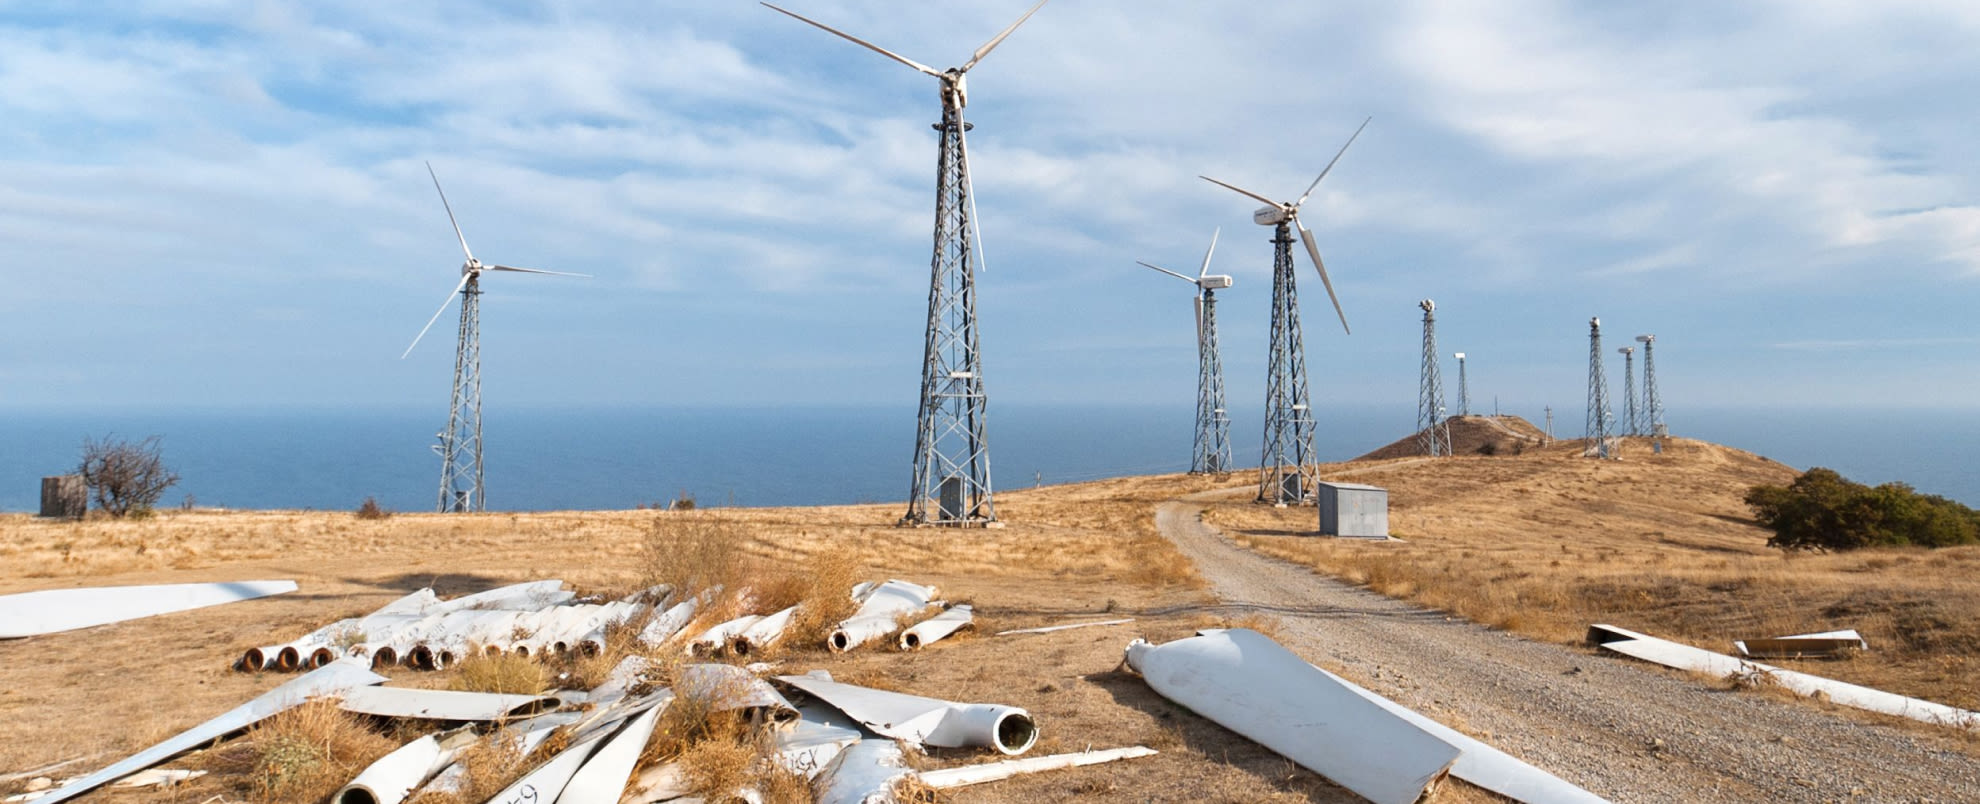 The risks of renewables: Top five risks of wind energy